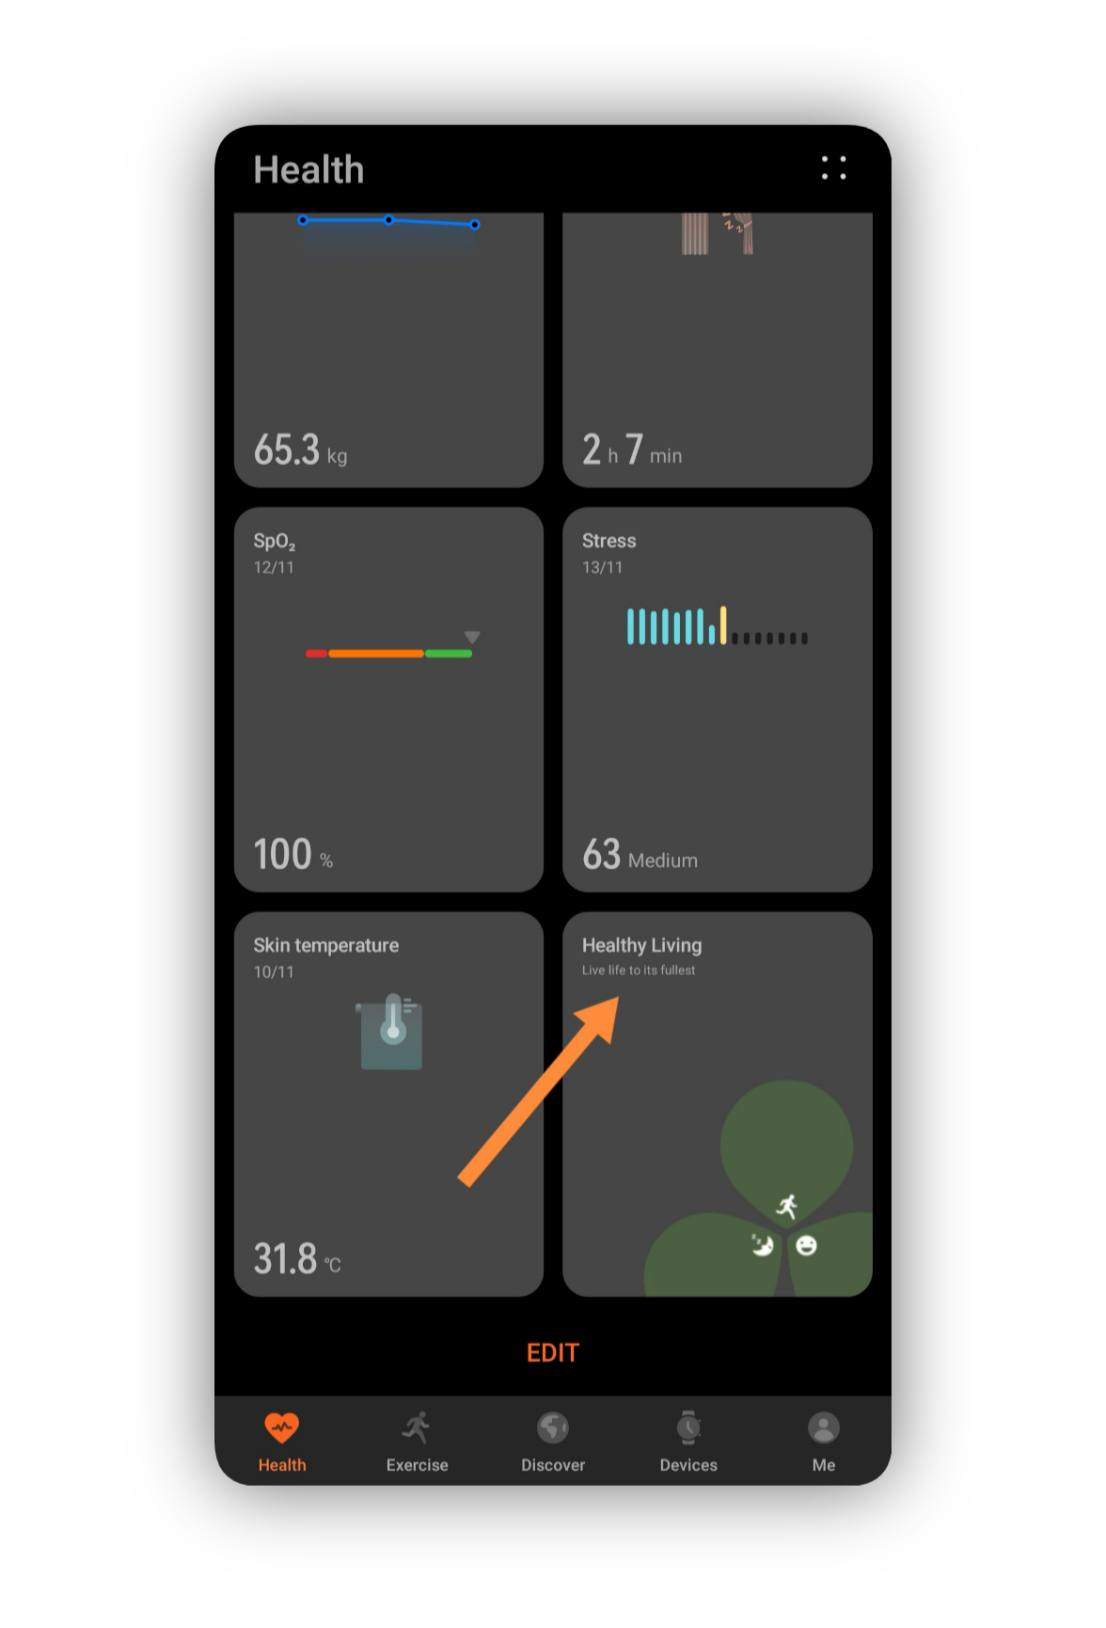 New big update Healthy lifestyle mode added to Huawei Health App